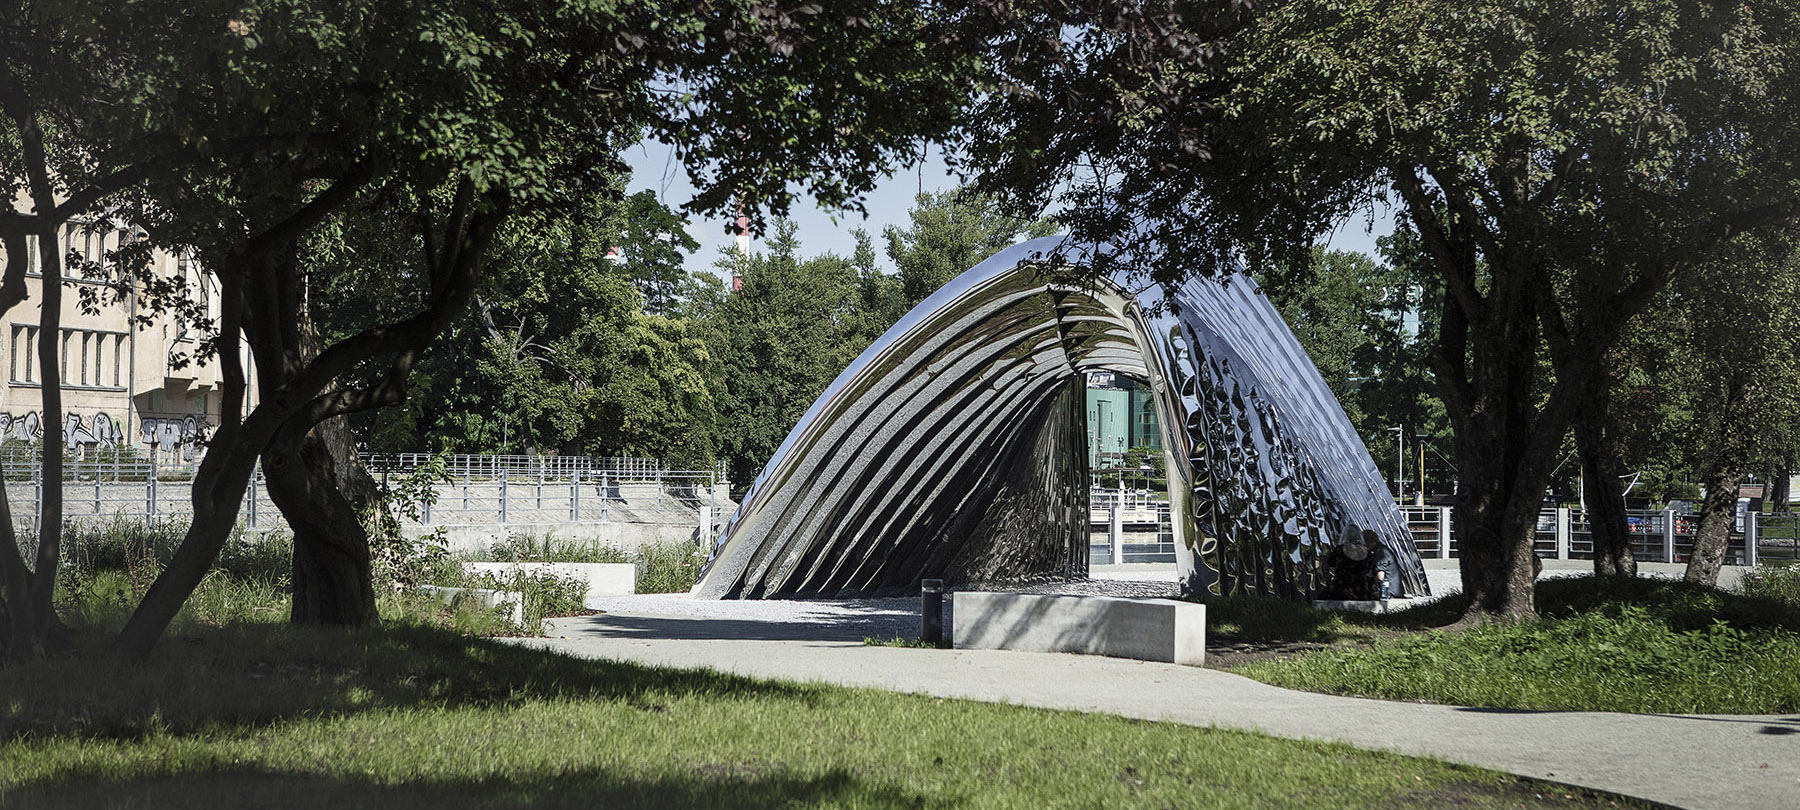 The NAWA Pavilion, a new "inflated steel" structure by Oskar Zieta